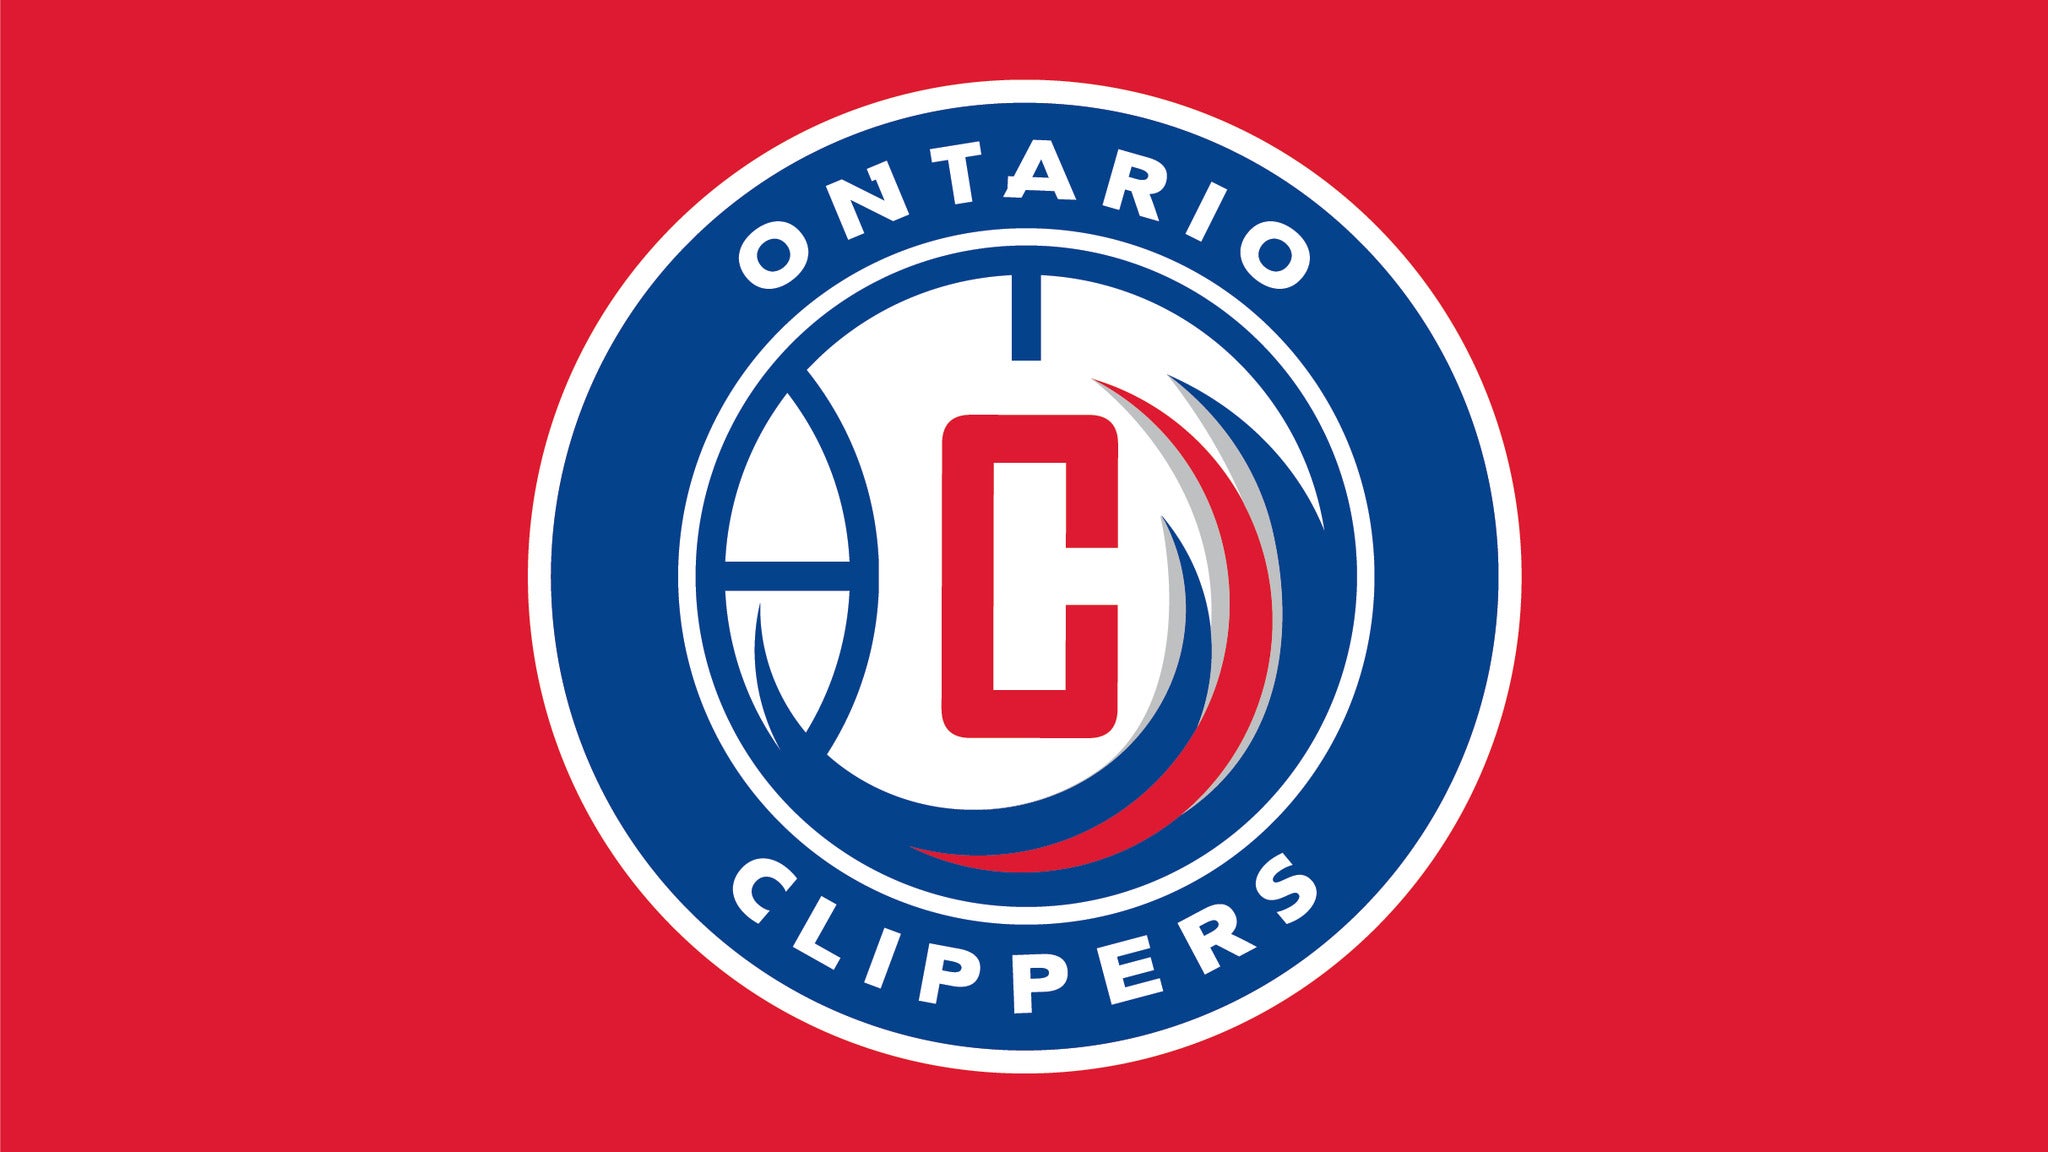 Ontario Clippers vs. Motor City Cruise at Toyota Arena - Ontario, CA 91764